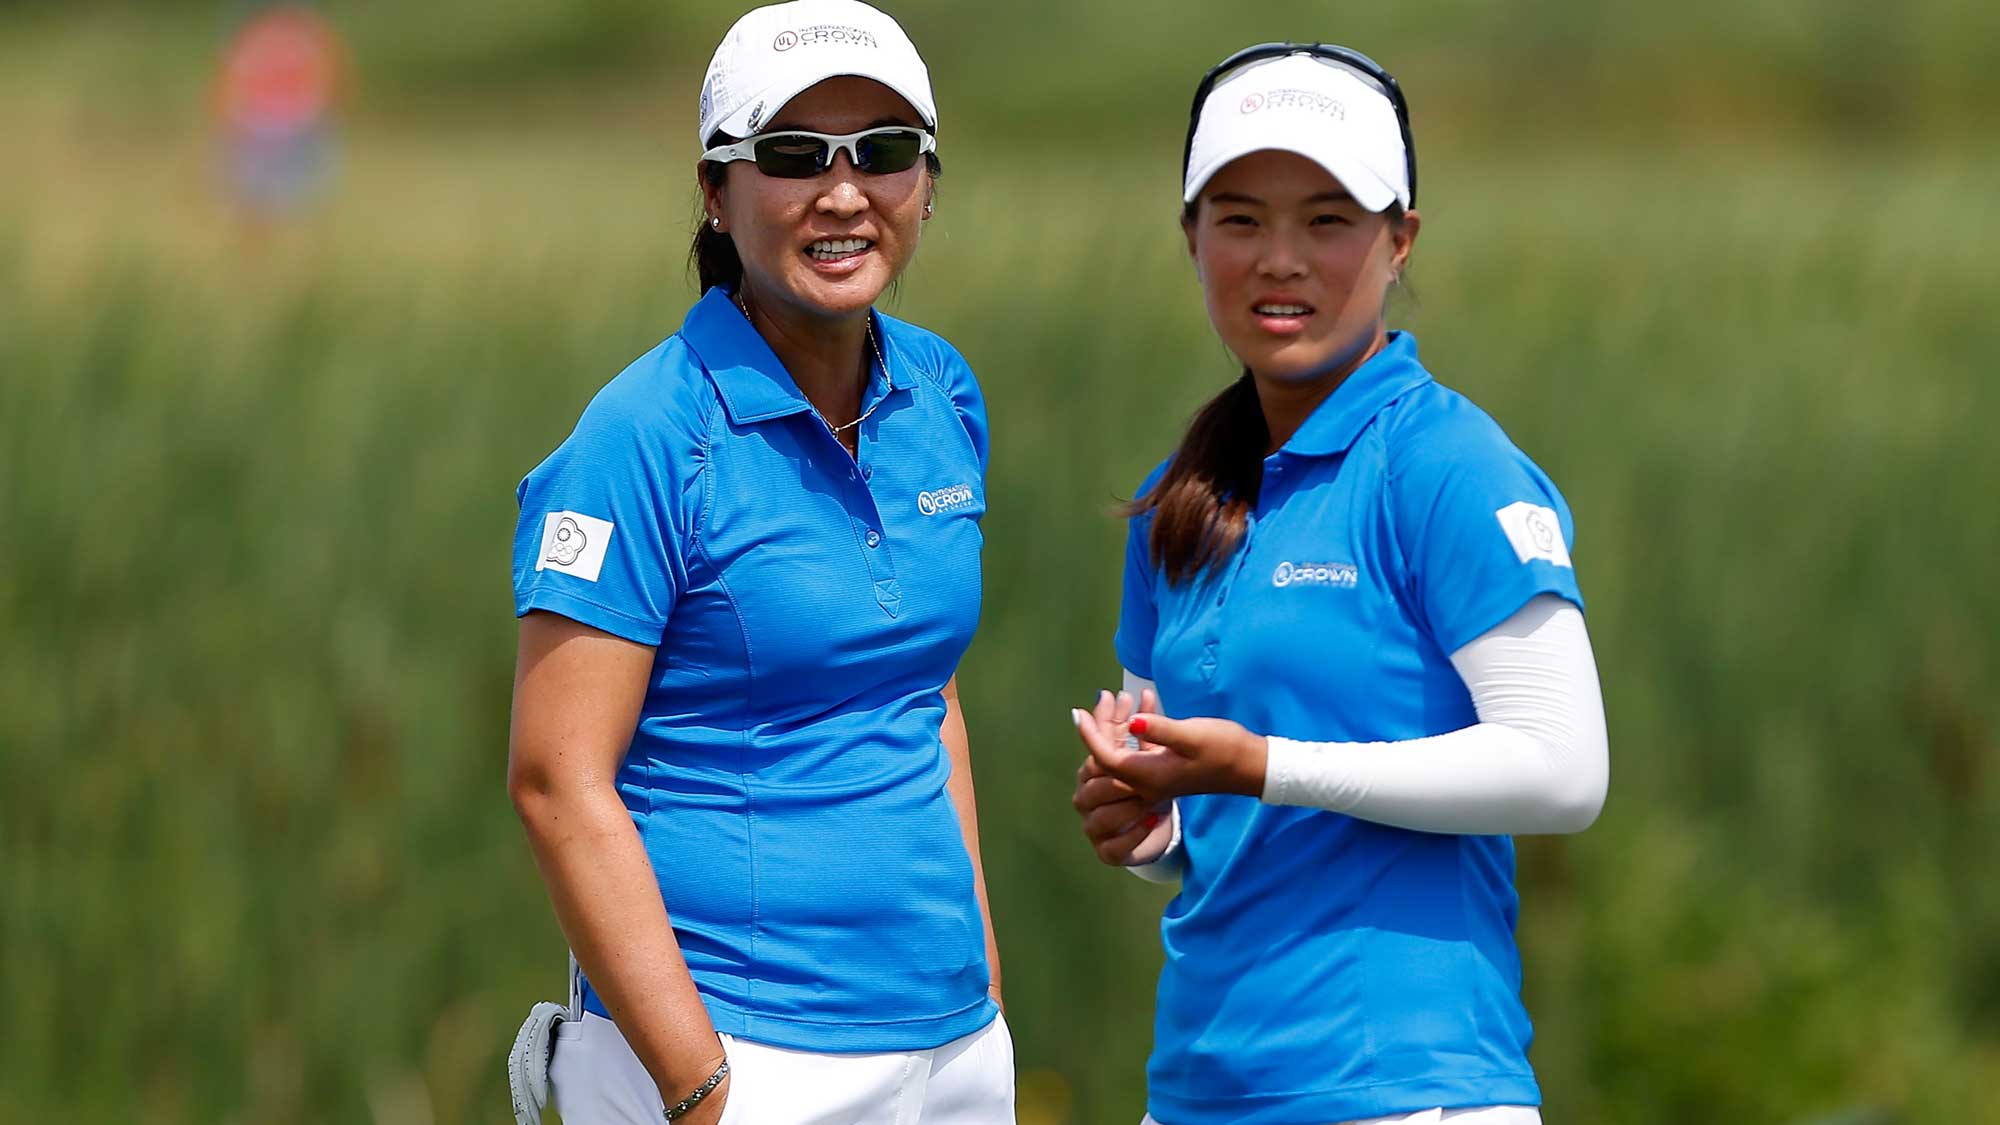 Candie Kung (L) and Ssu-Chia Cheng of Chinese Taipei stand on the fourth green during the four-ball session of the 2016 UL International Crown